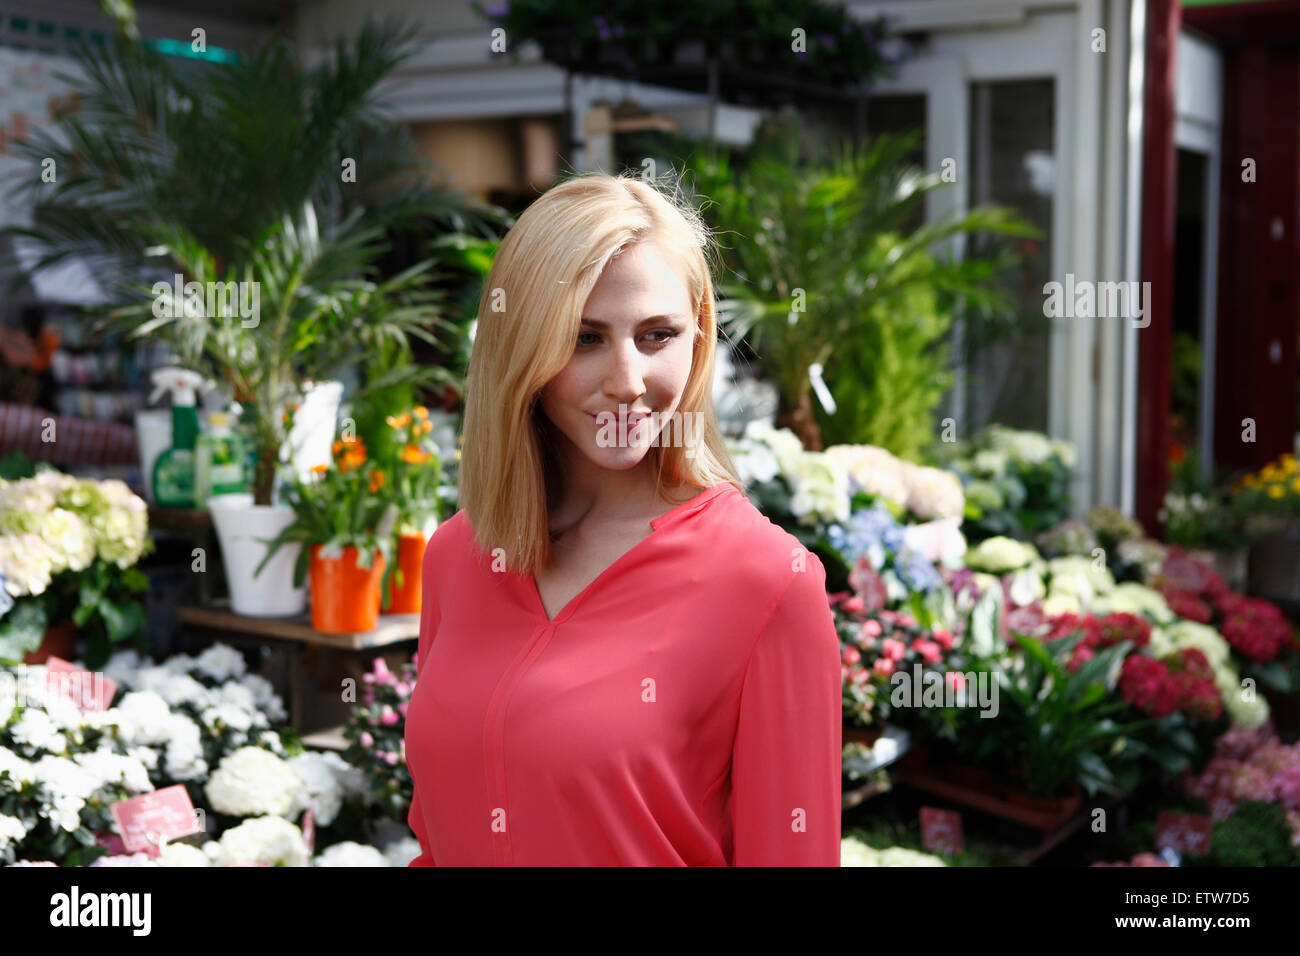 Portrait of smiling blond woman on weekly market Stock Photo